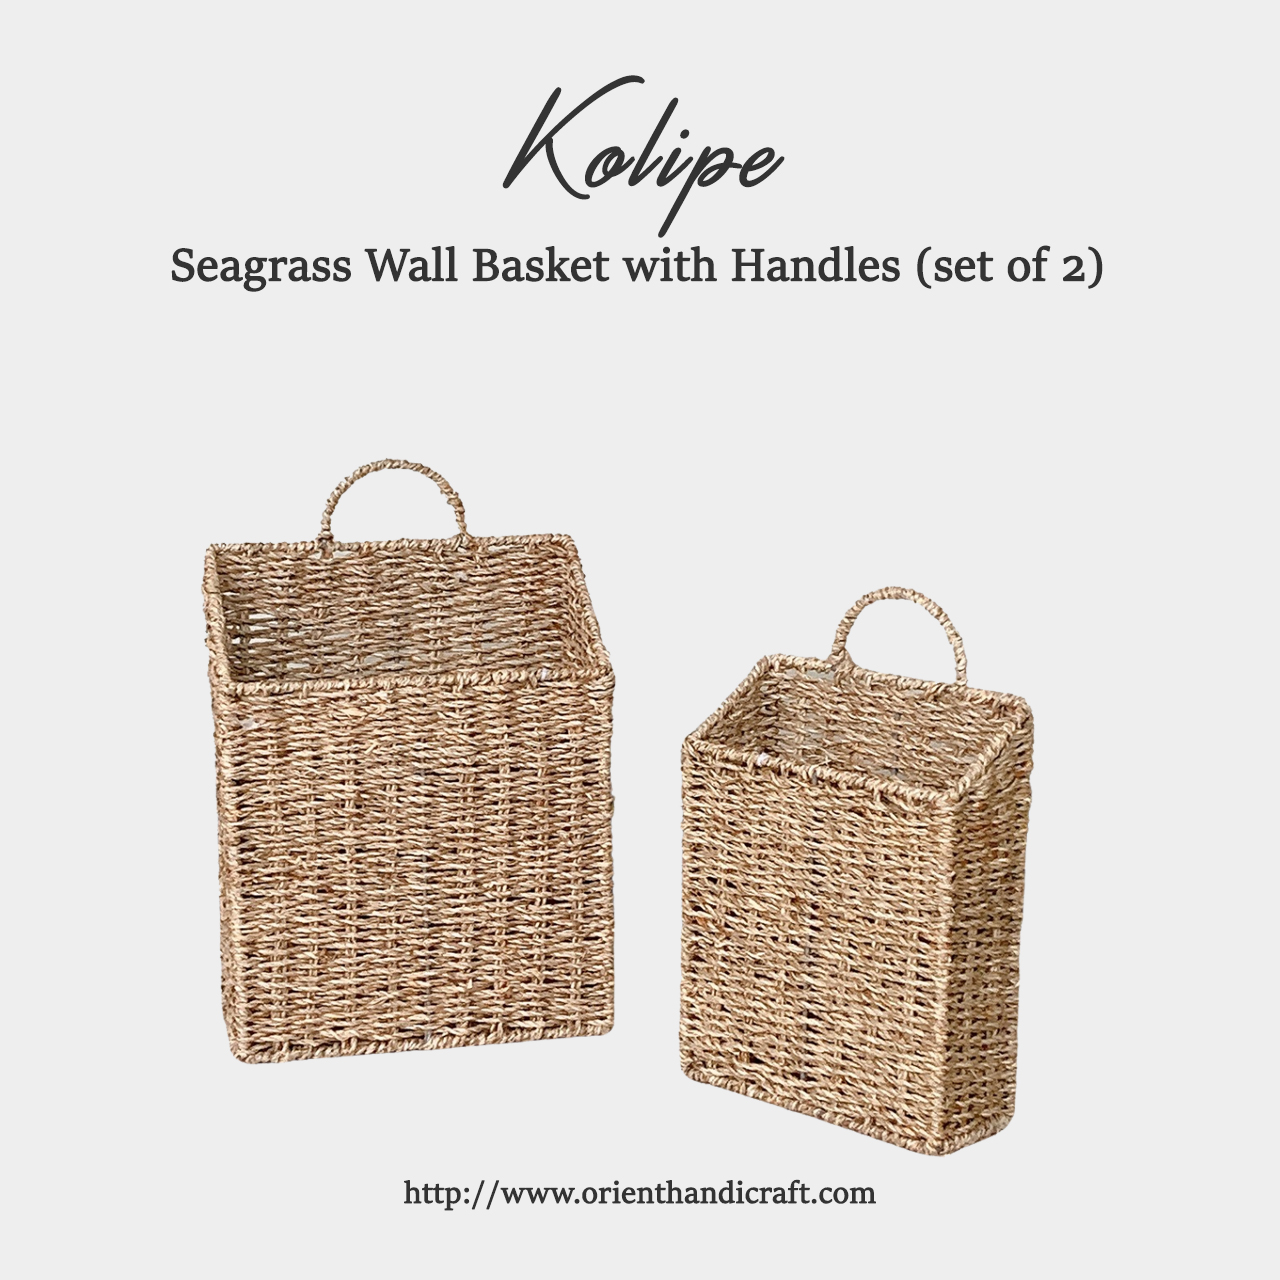 Seagrass Wall Basket with Handles